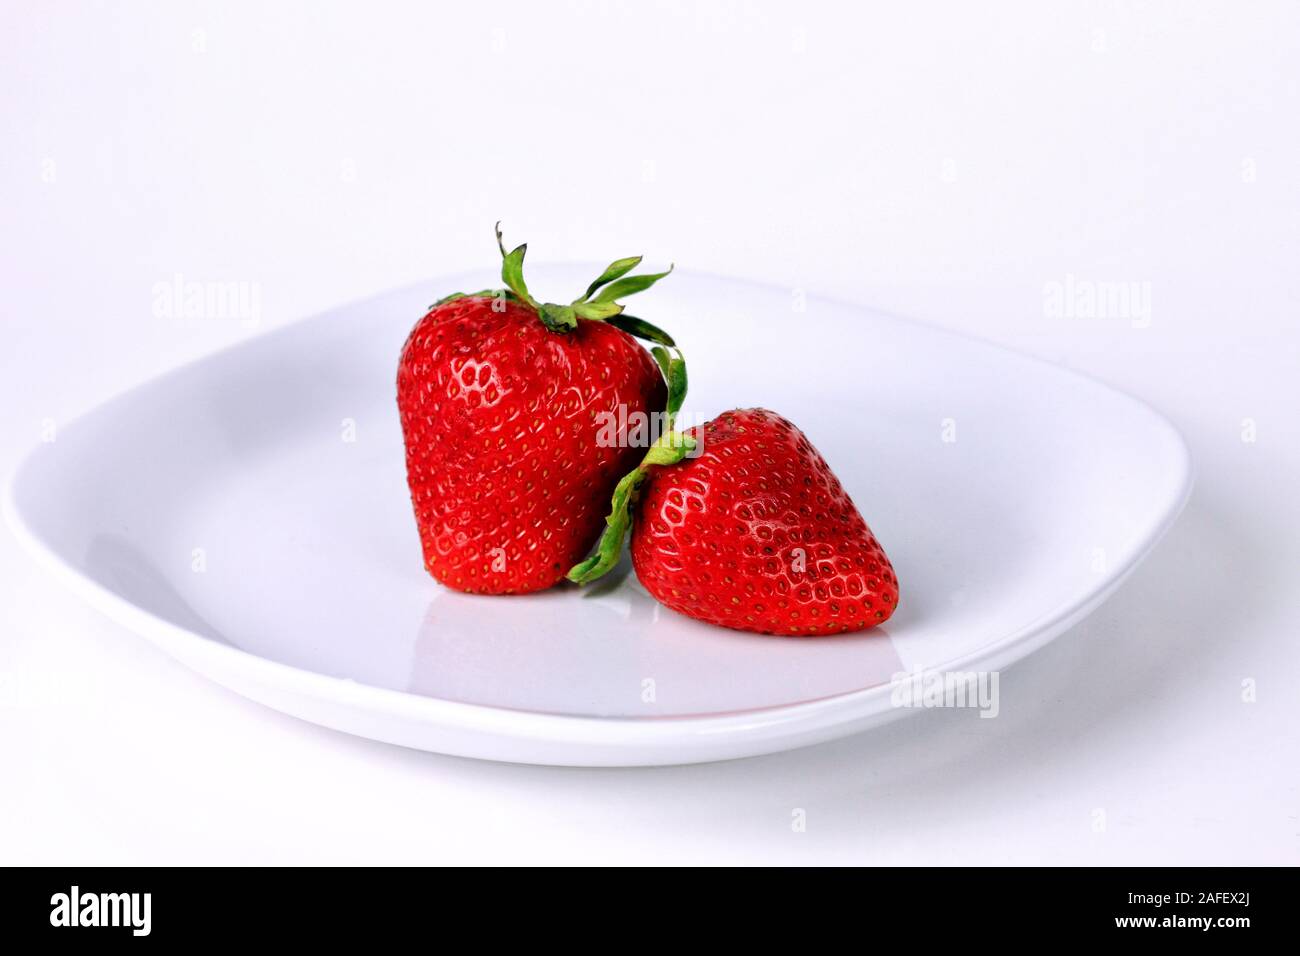 Two ripe red strawberries on a white plate against a white background. Stock Photo